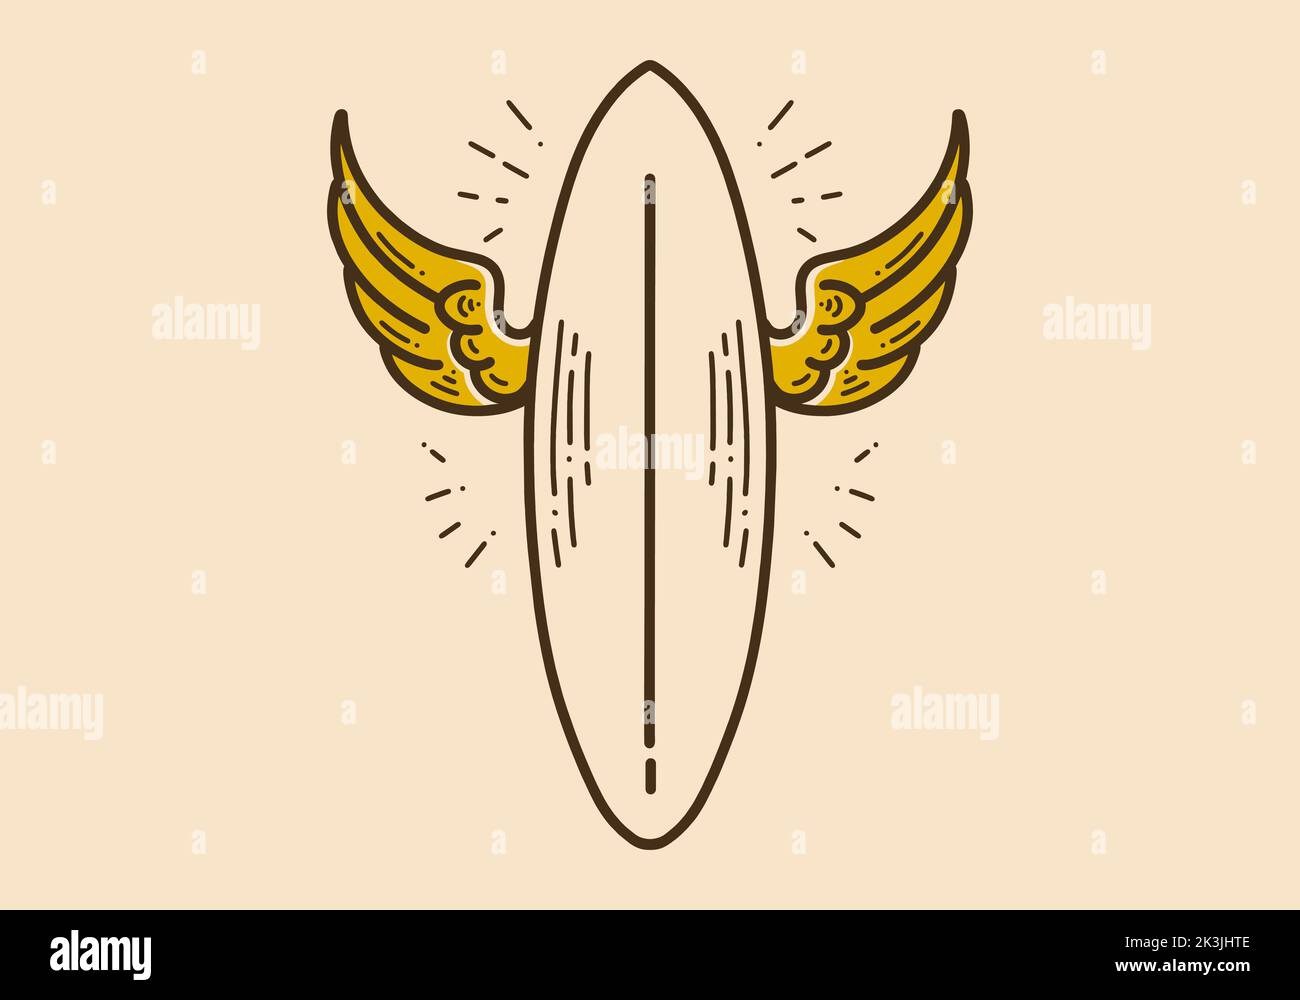 surfboard with wings retro vintage art design Stock Vector